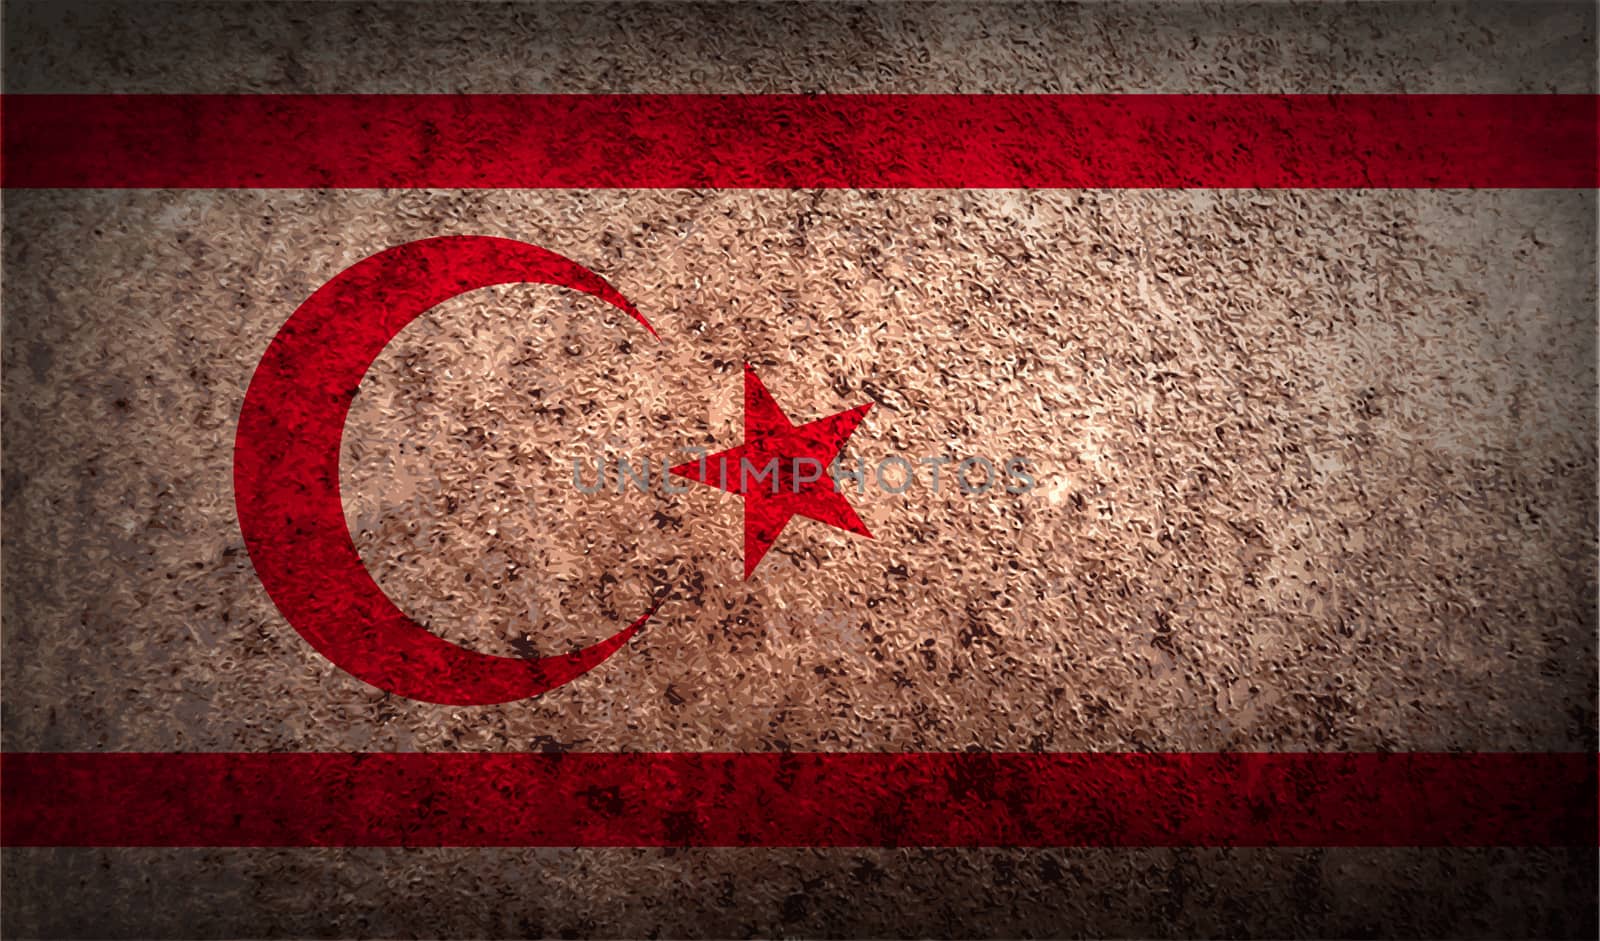 Flag of Turkish and Northern Cyprus with old texture.  illustration